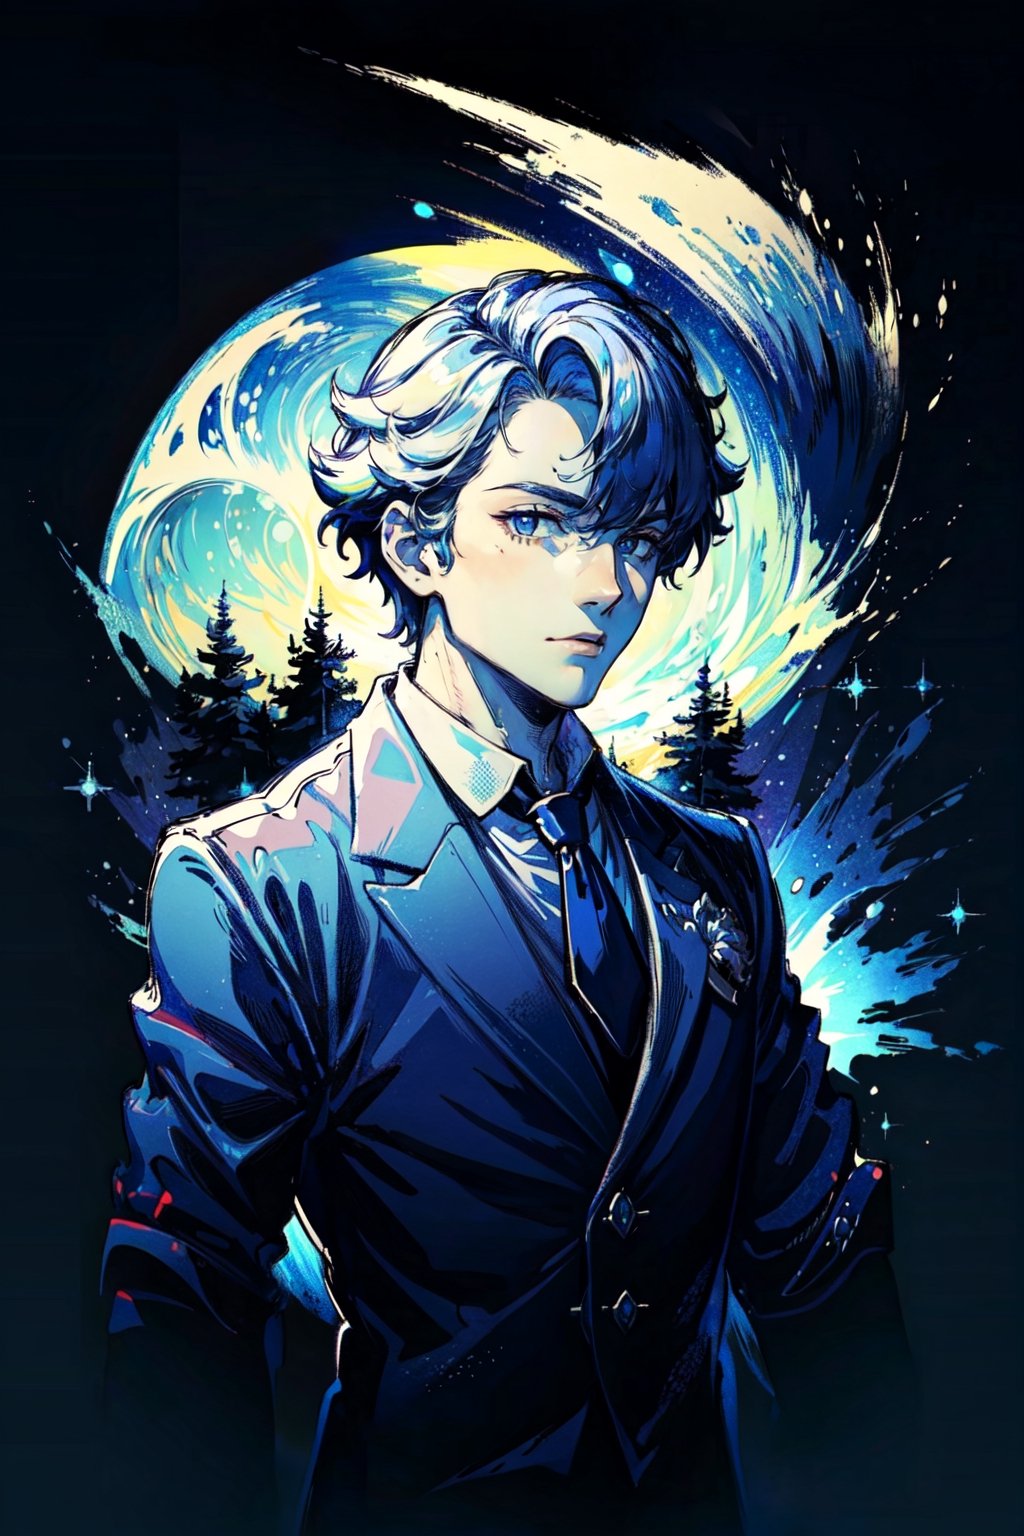 man, jacket, blue car, moon, work of art, wallpaper, soft shading, suit without tie, wriothesley